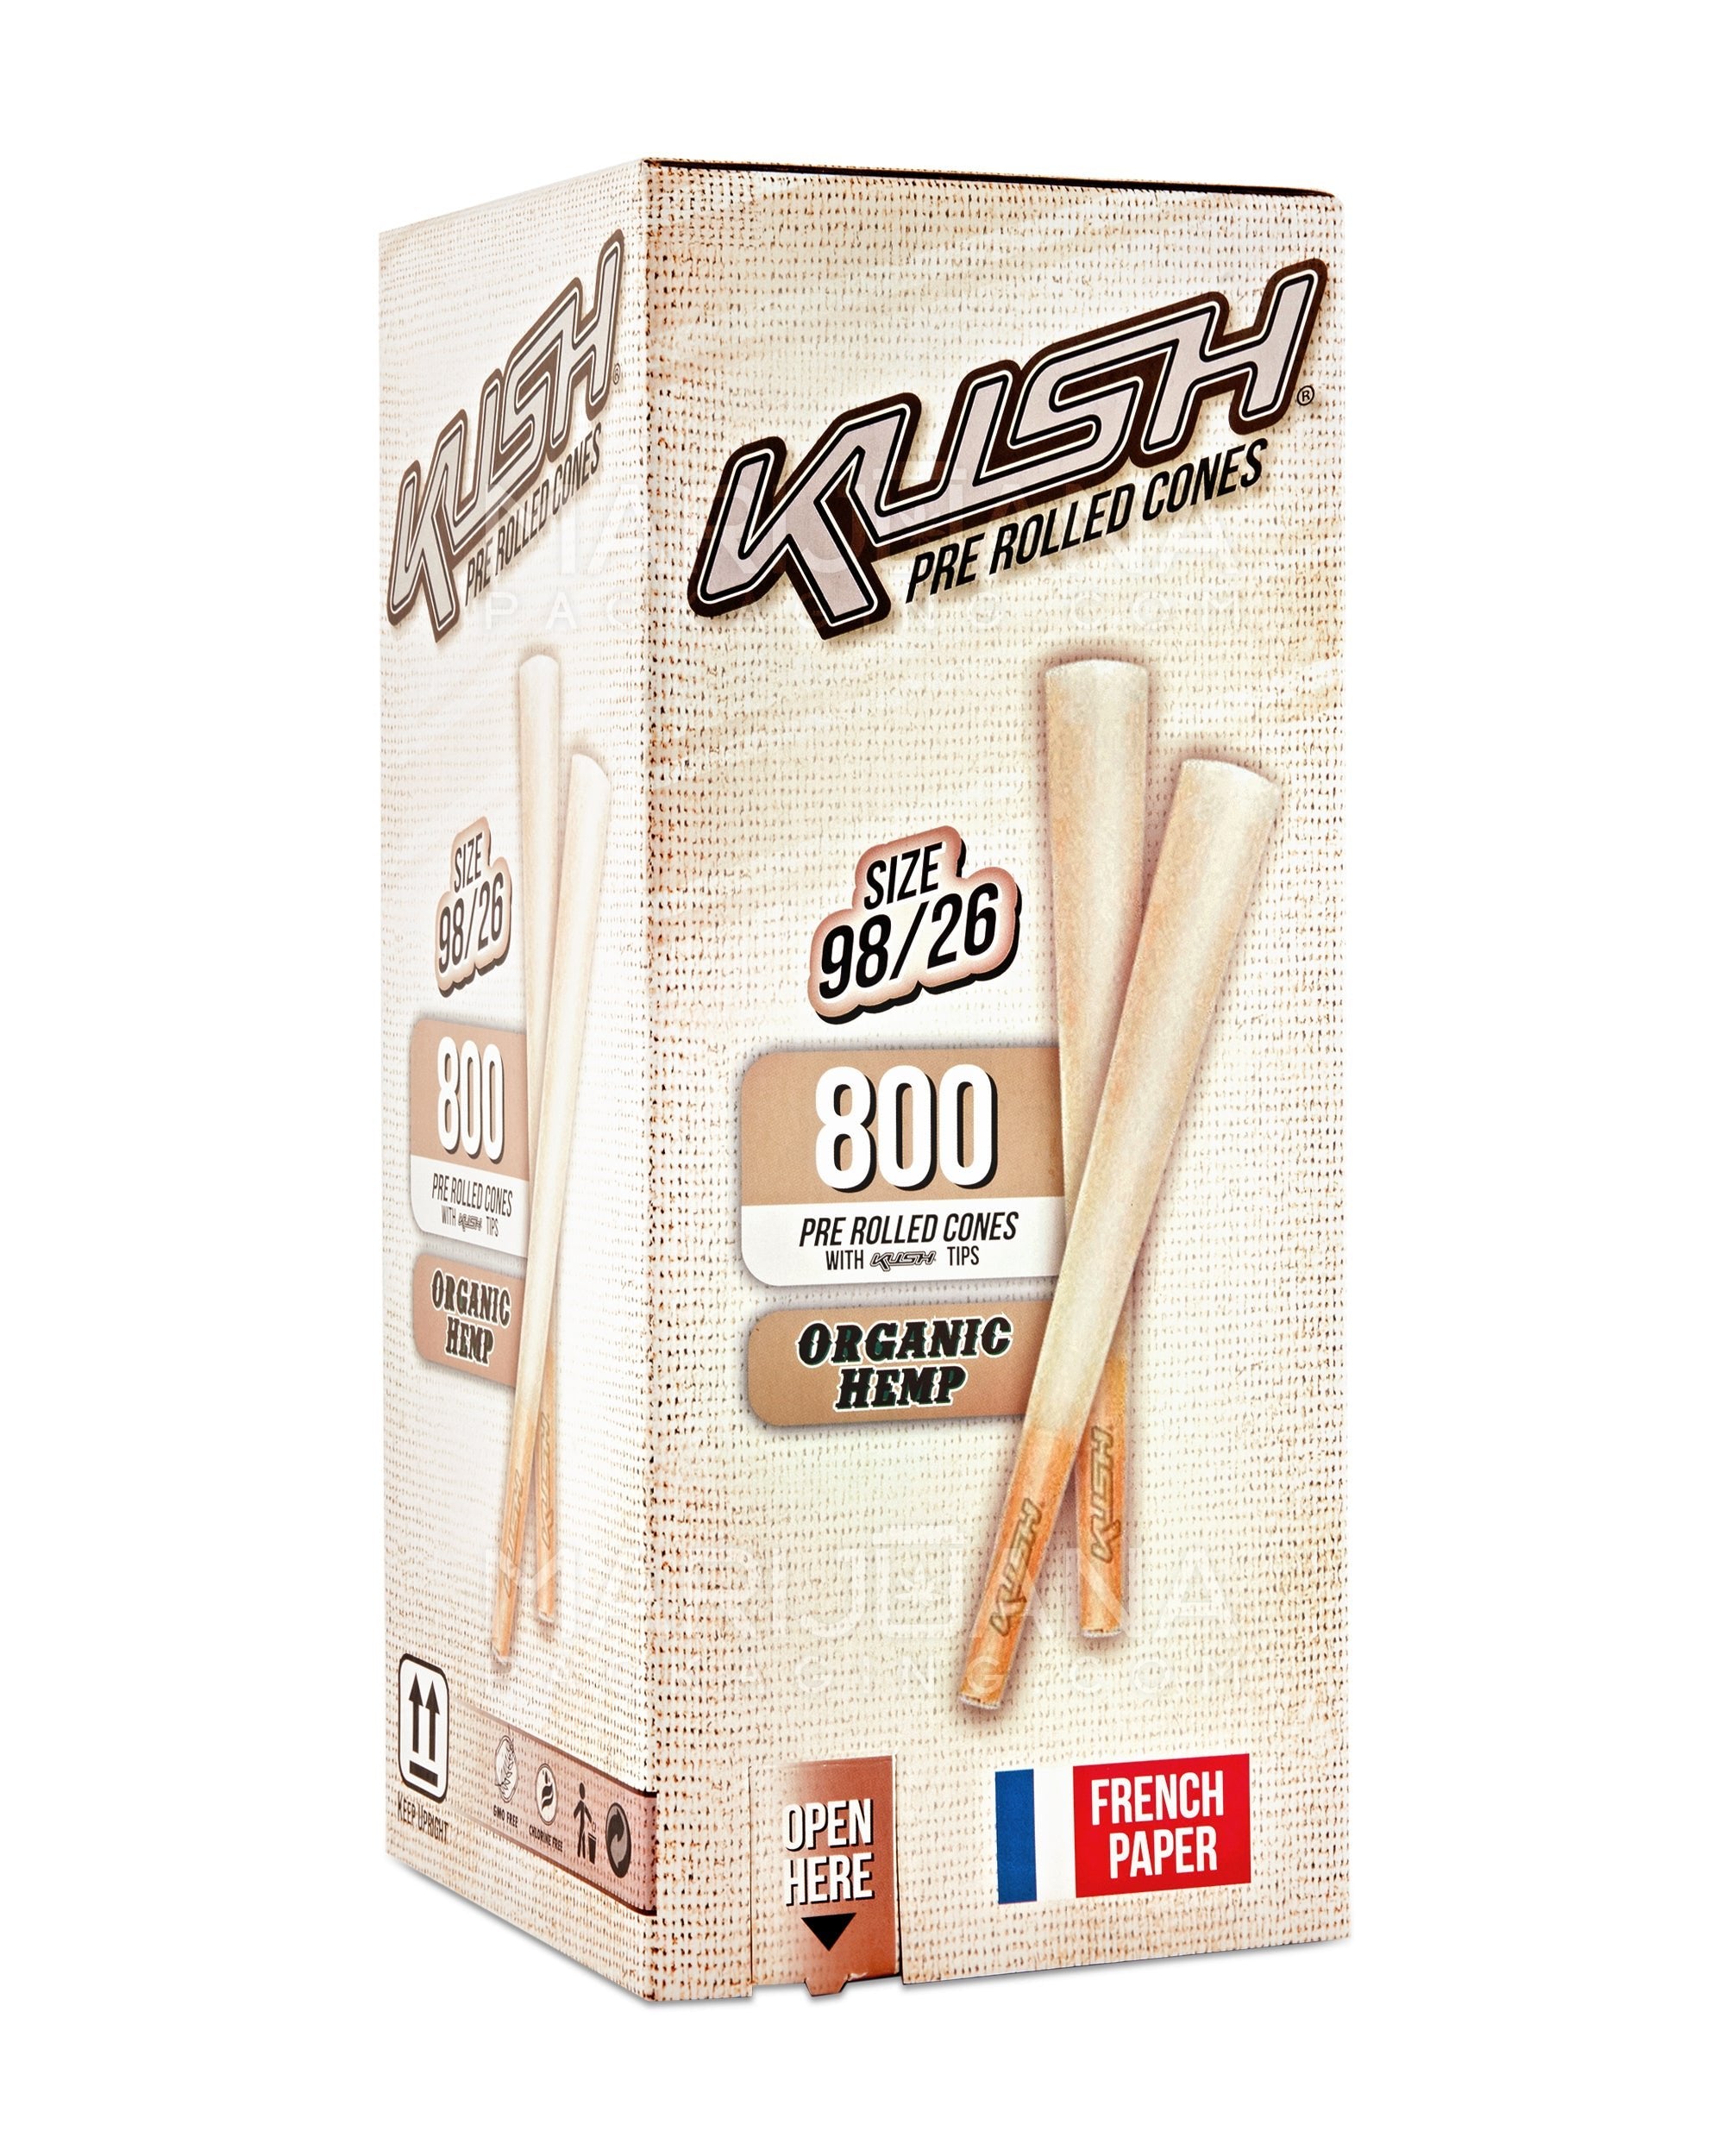 KUSH | Organic 98 Special Size Pre-Rolled Cones w/ Filter Tip | 98mm - Organic Hemp Paper - 800 Count - 1